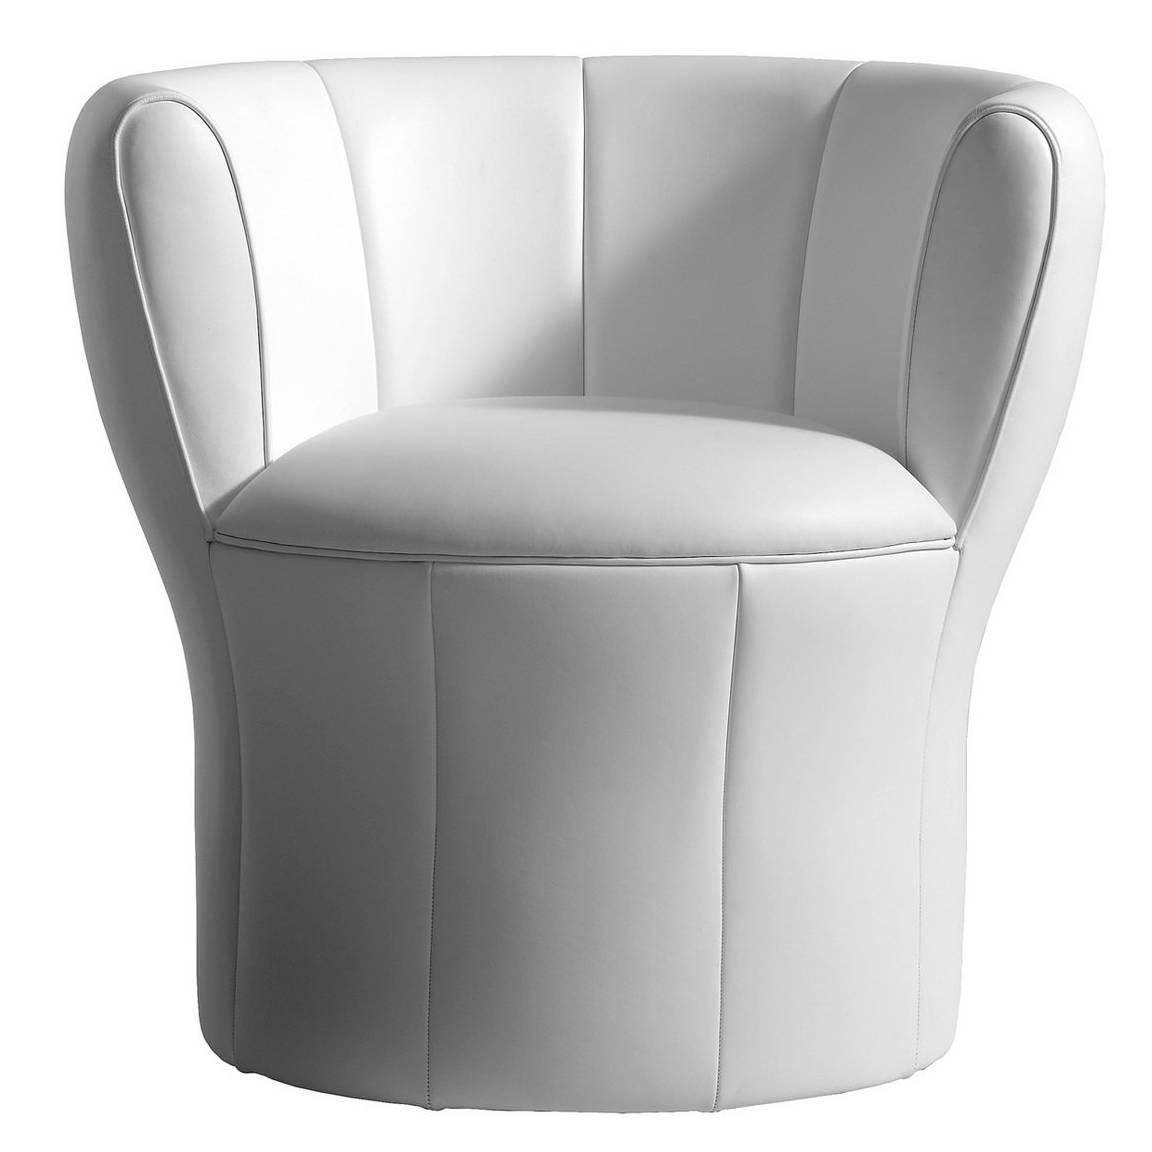 "Lisa" Leather or Fabric Fiberglass Armchair by Laudani & Romanelli for Driade For Sale